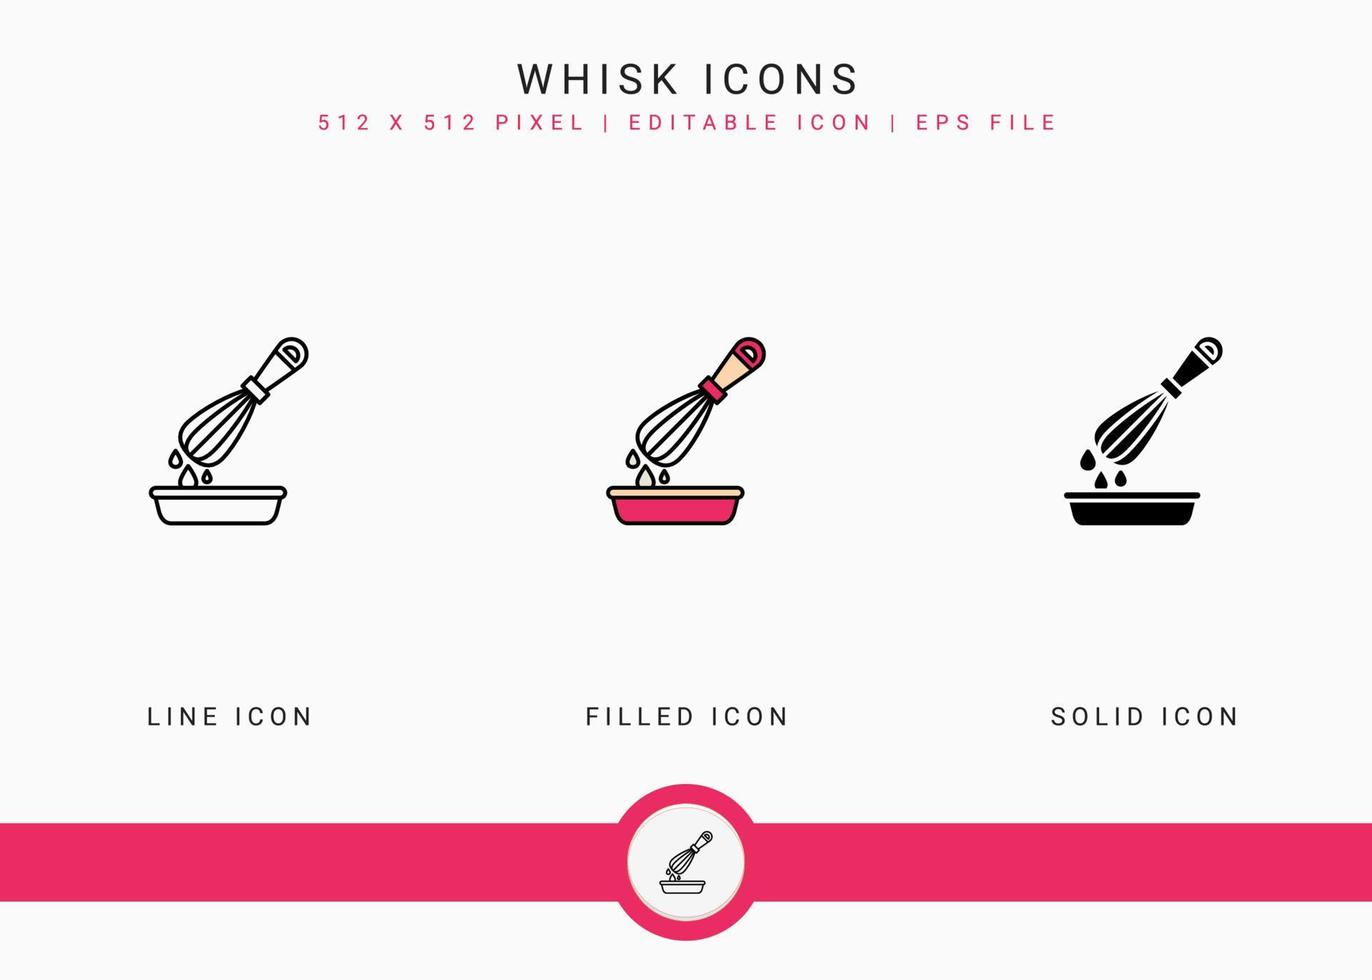 Whisk icons set vector illustration with solid icon line style. Kitchen utensils concept. Editable stroke icon on isolated background for web design, user interface, and mobile application